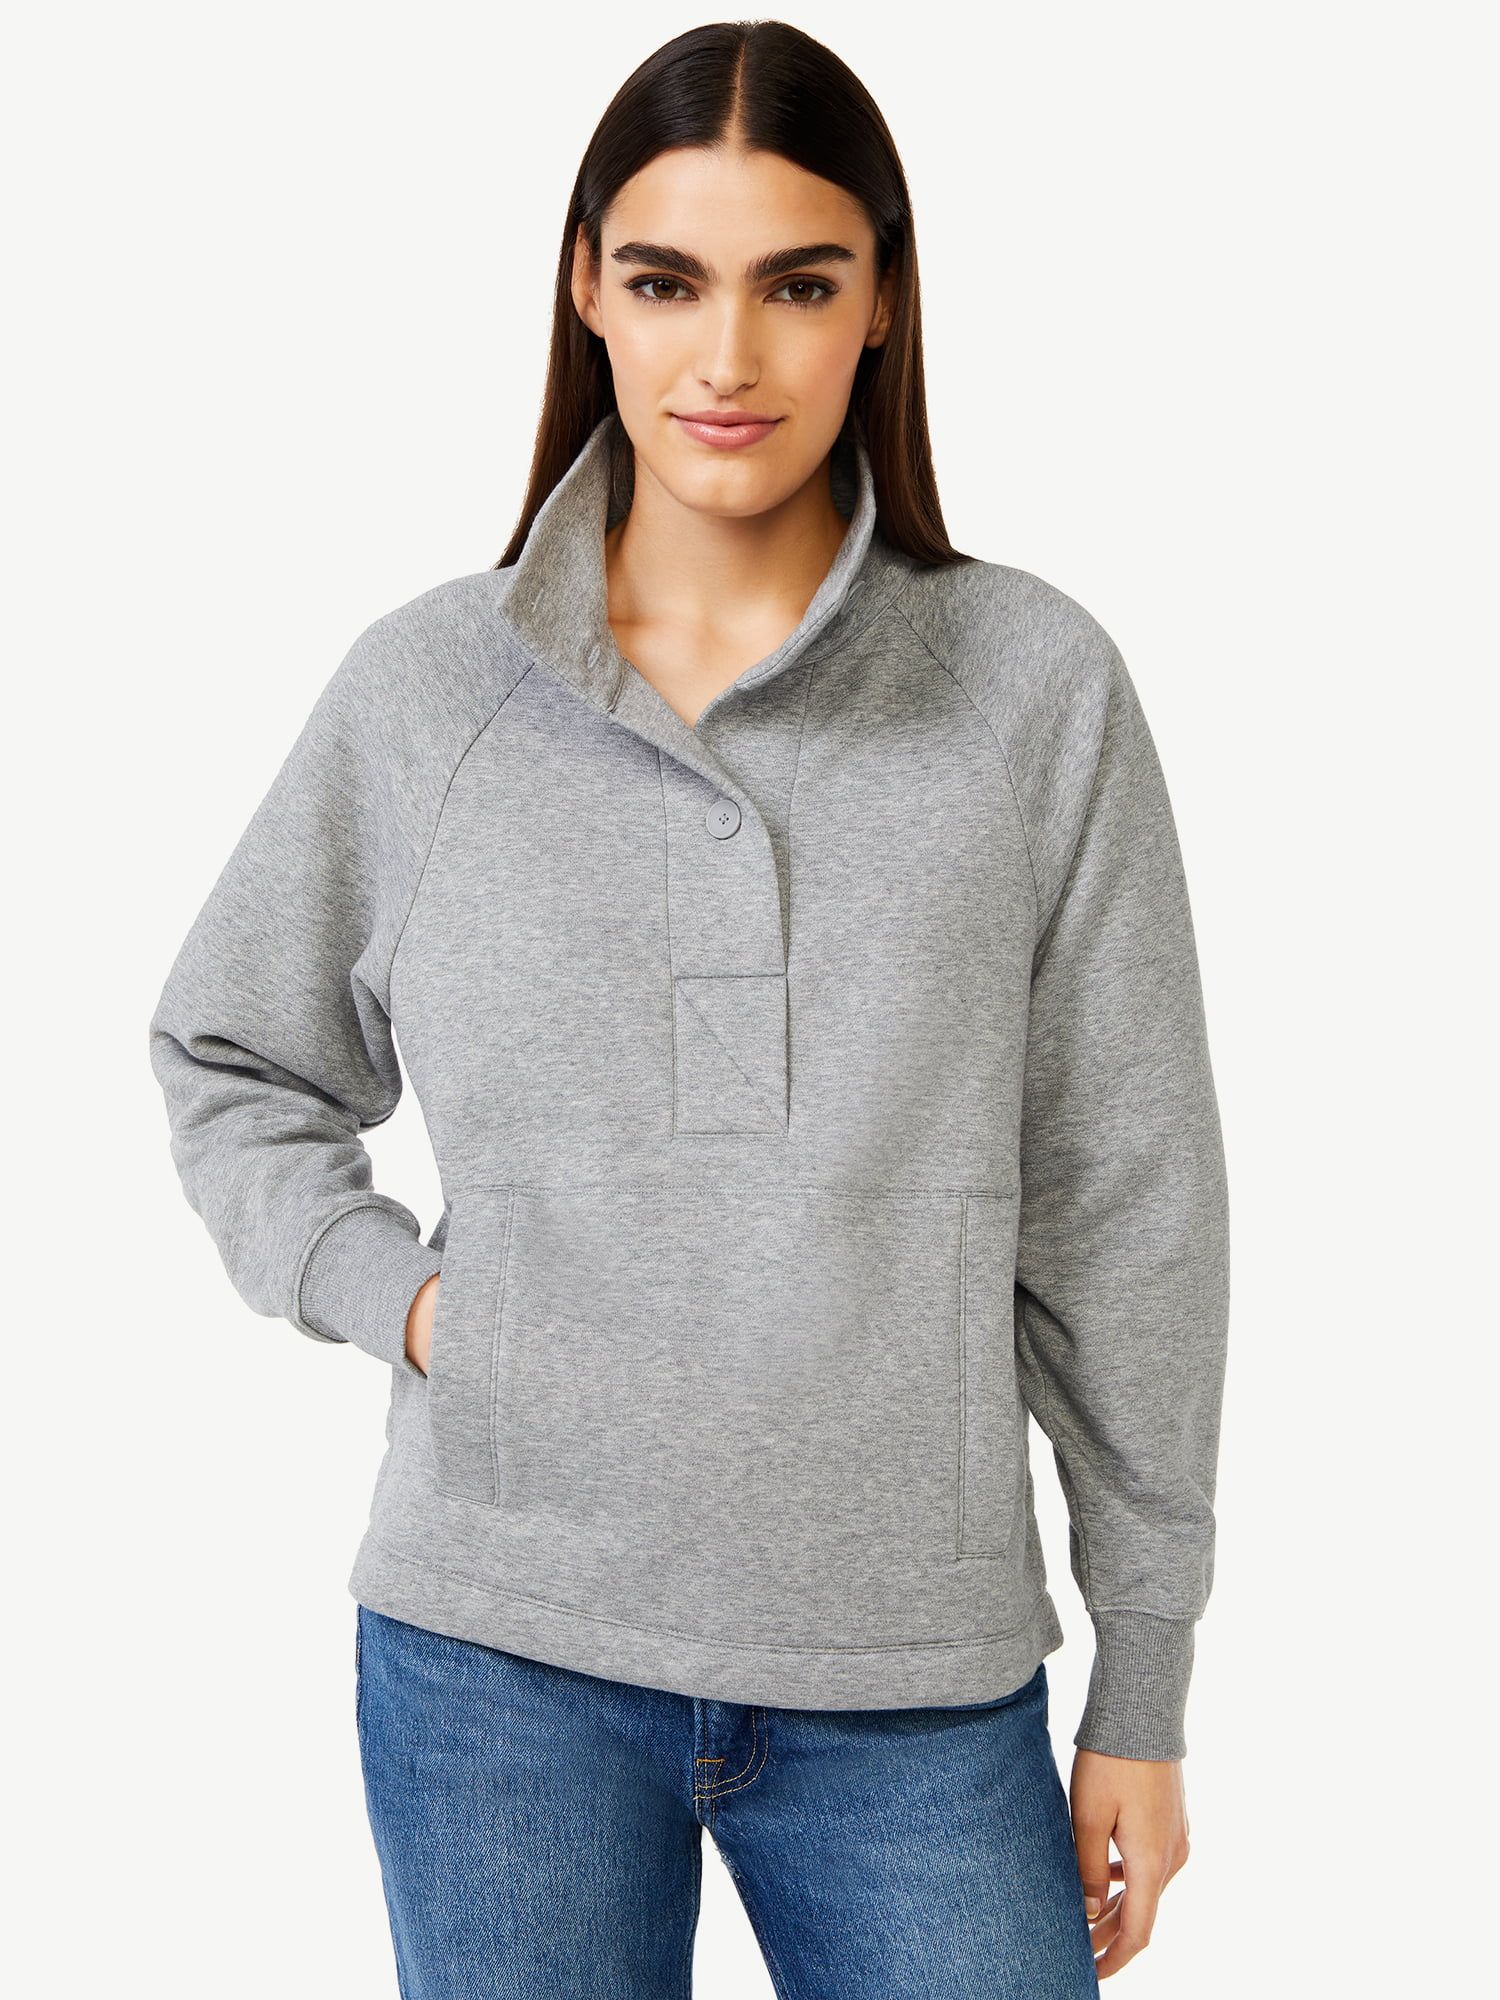 Free Assembly Women's Fleece Placket Popover Top with Raglan Sleeves | Walmart (US)